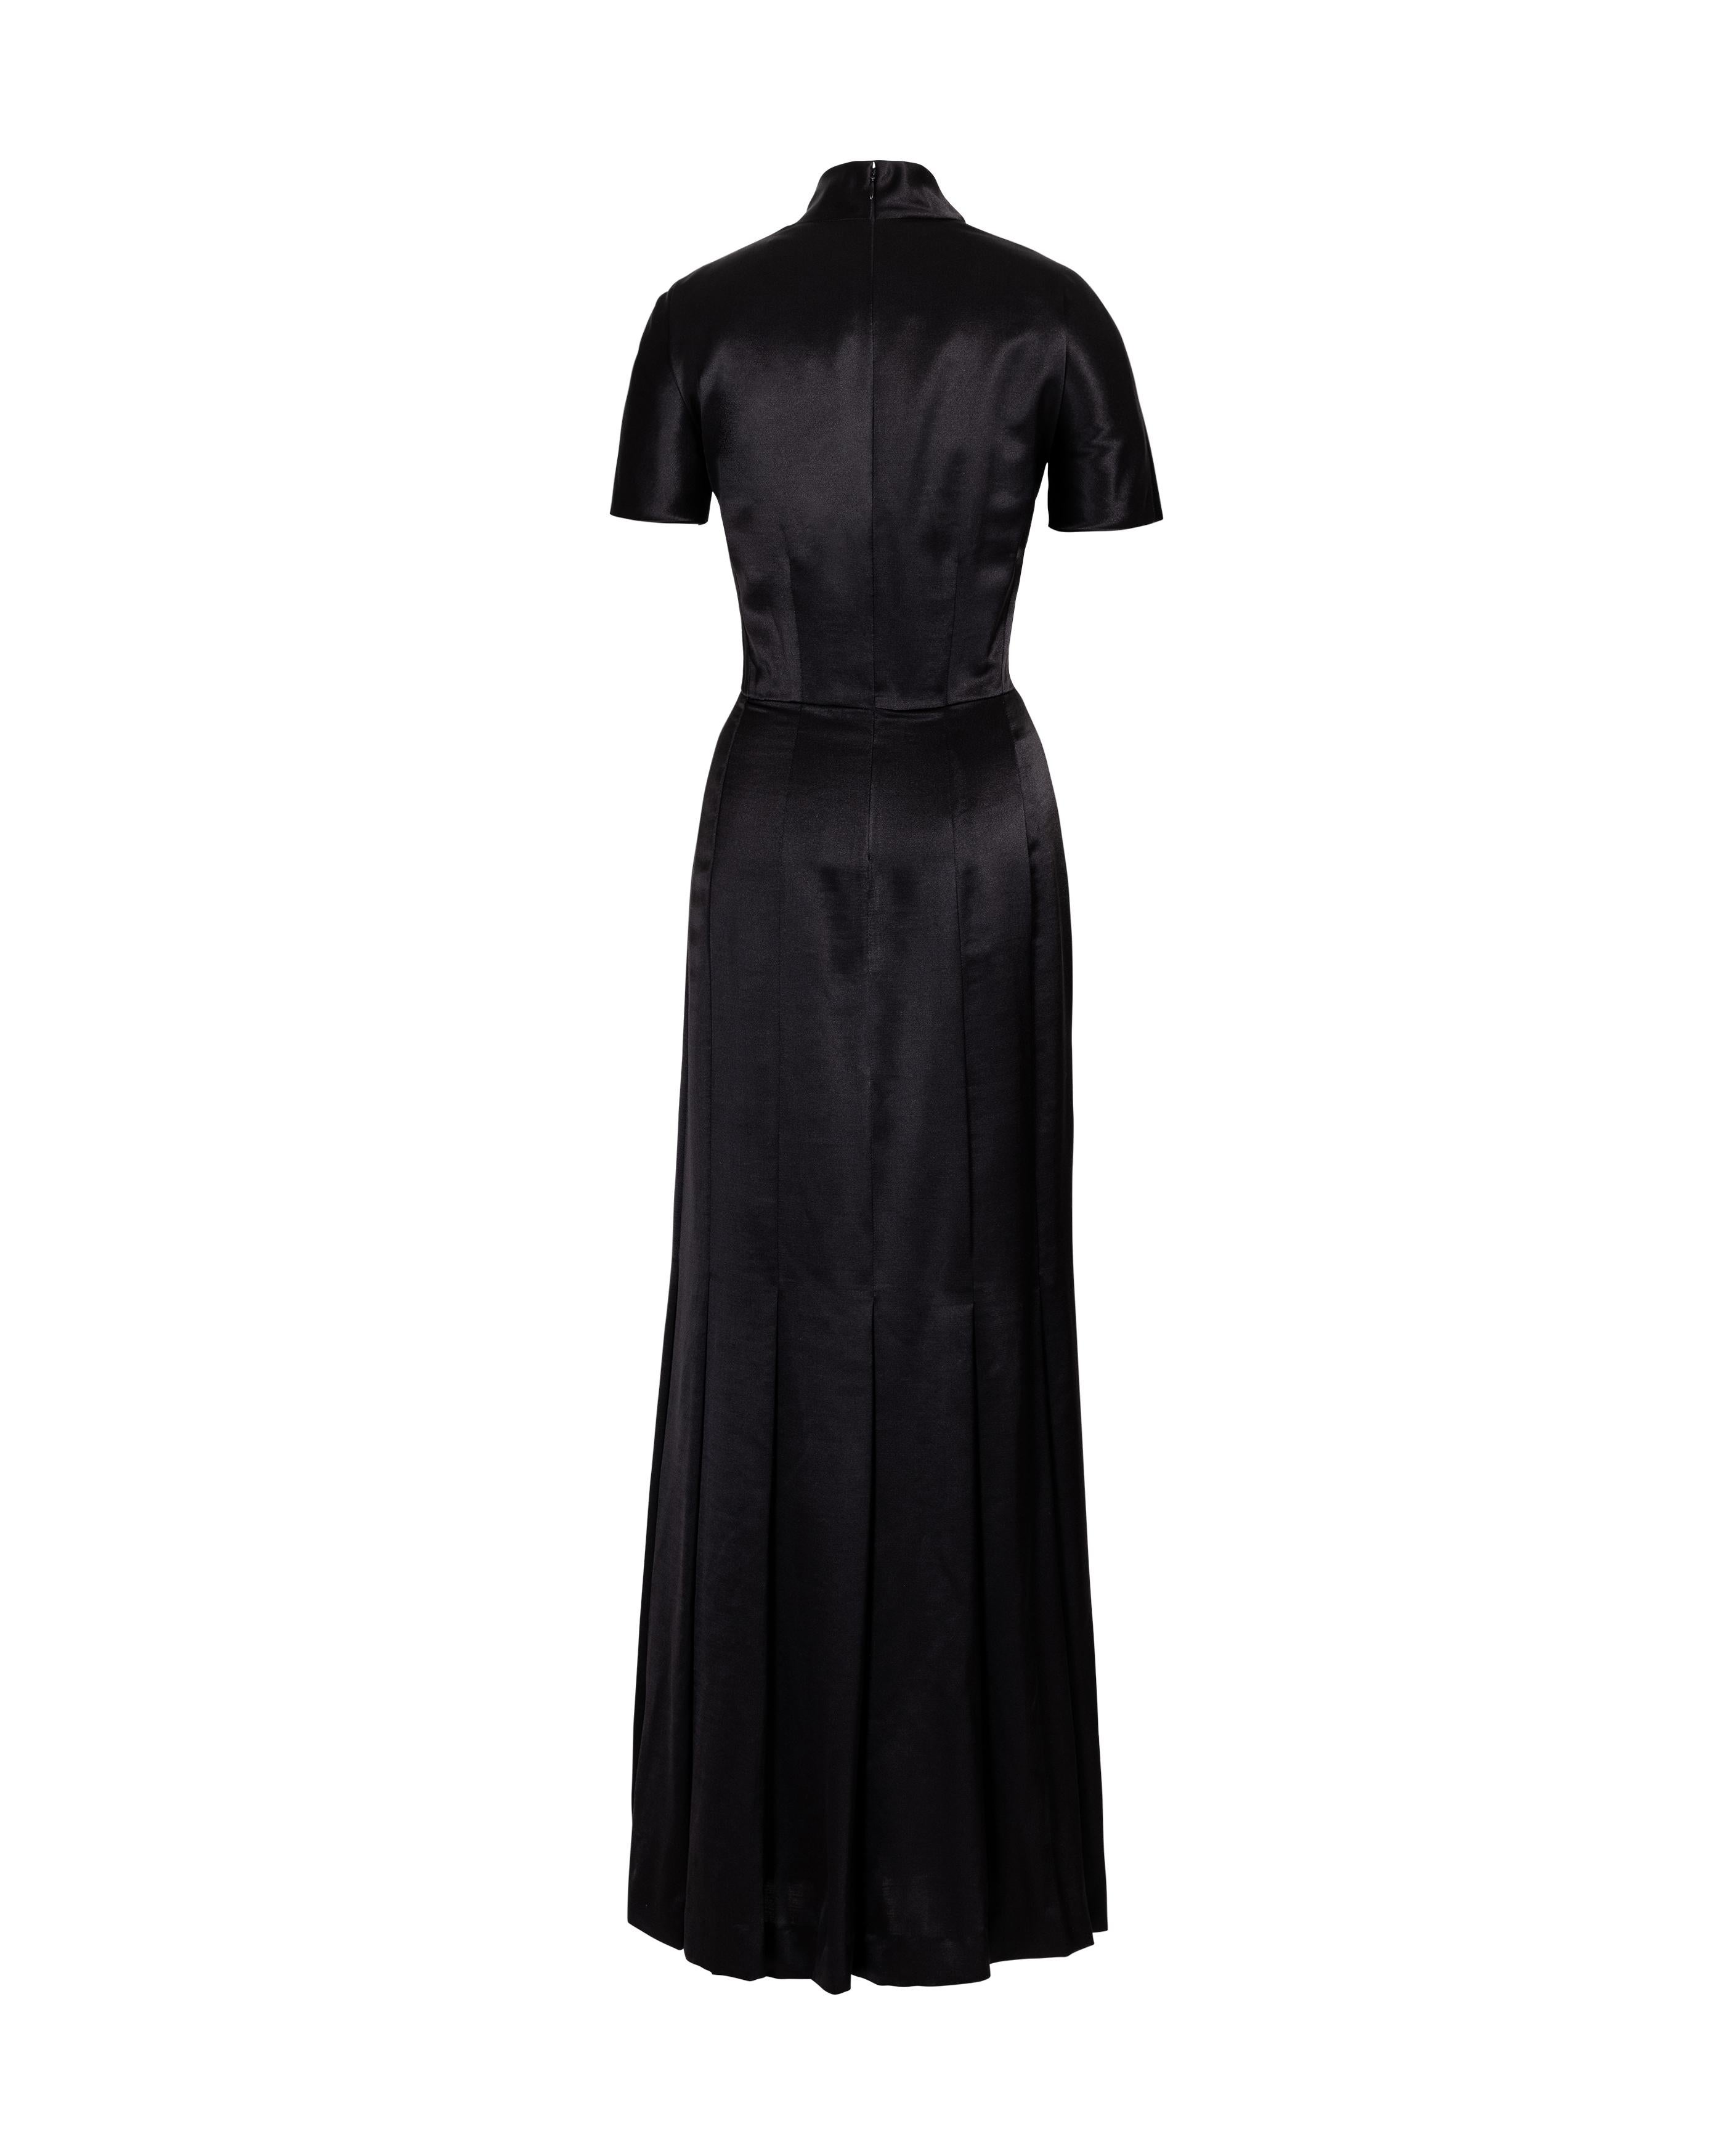 Women's 1990's Givenchy by Alexander McQueen Black Short Sleeve Pleated Gown